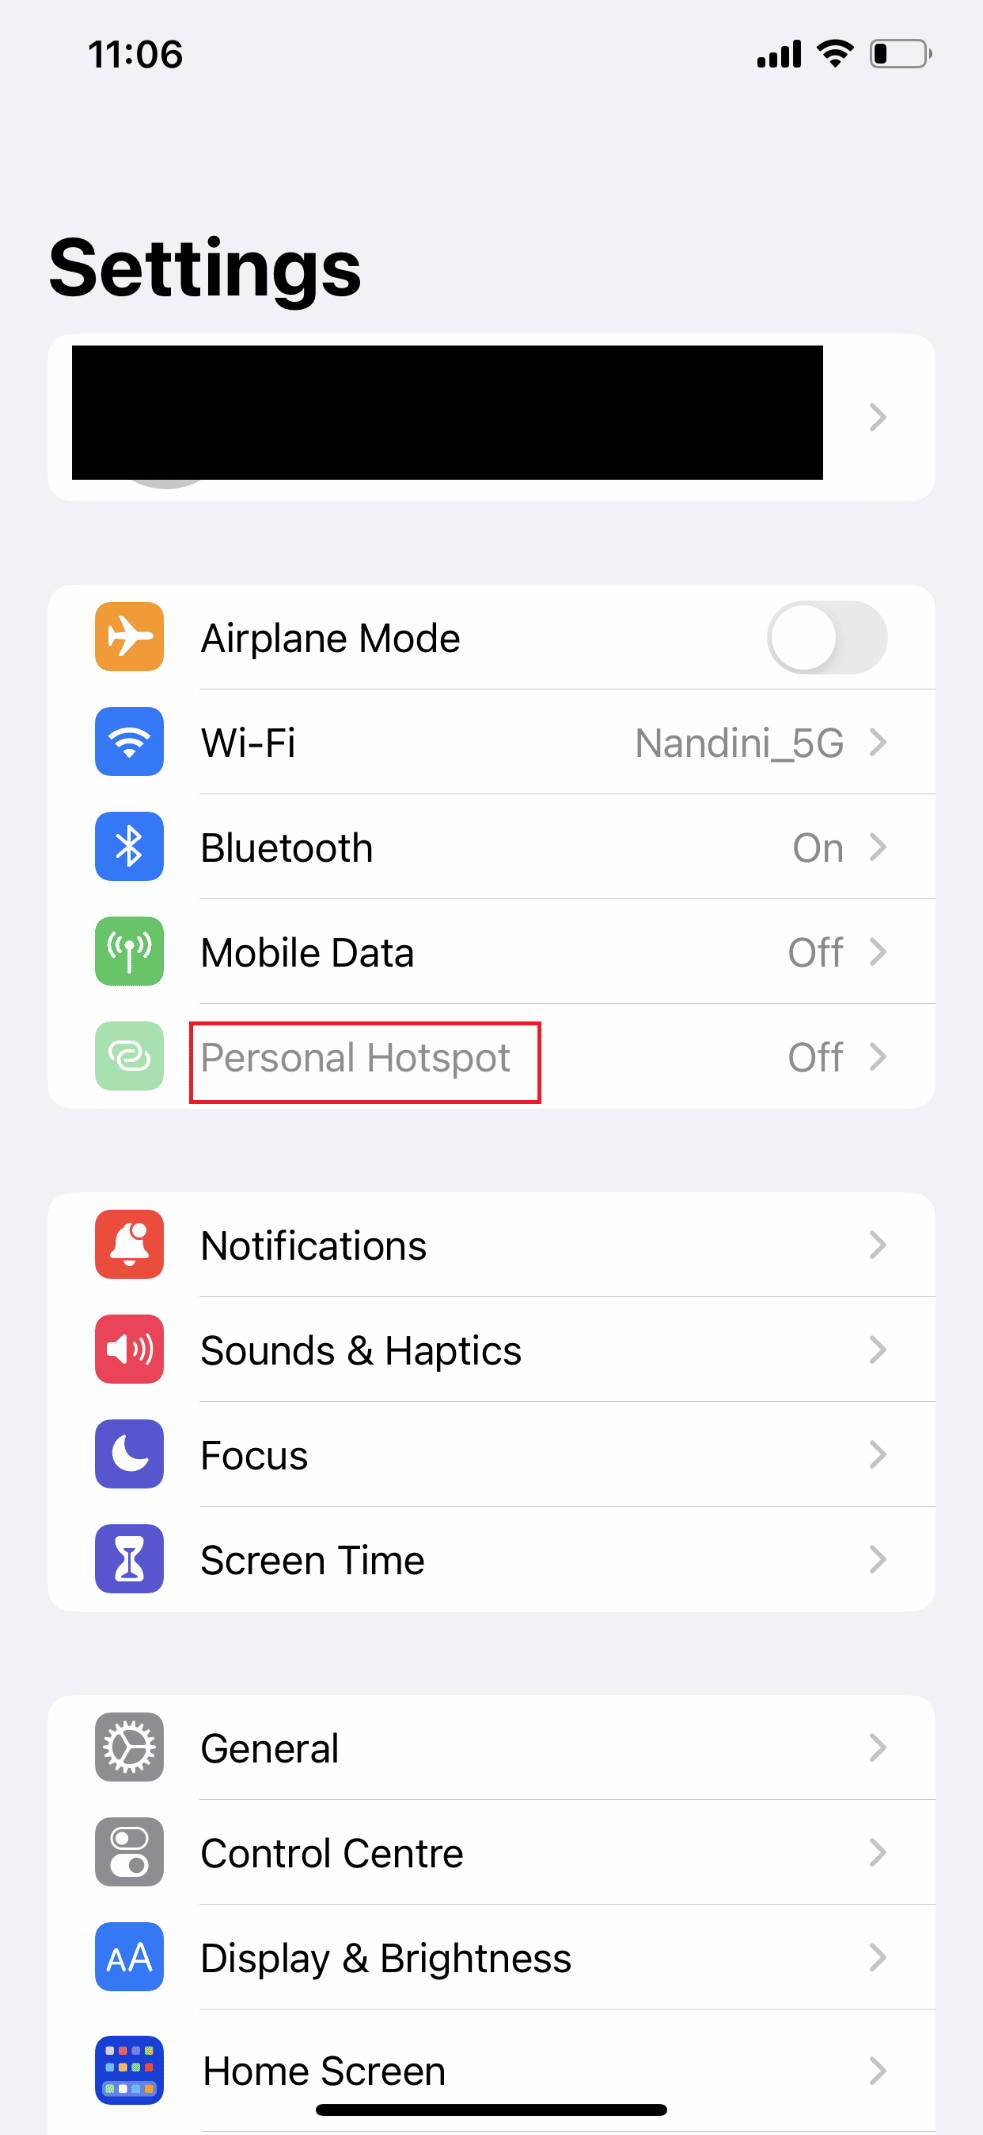 tap on Personal Hotspot.